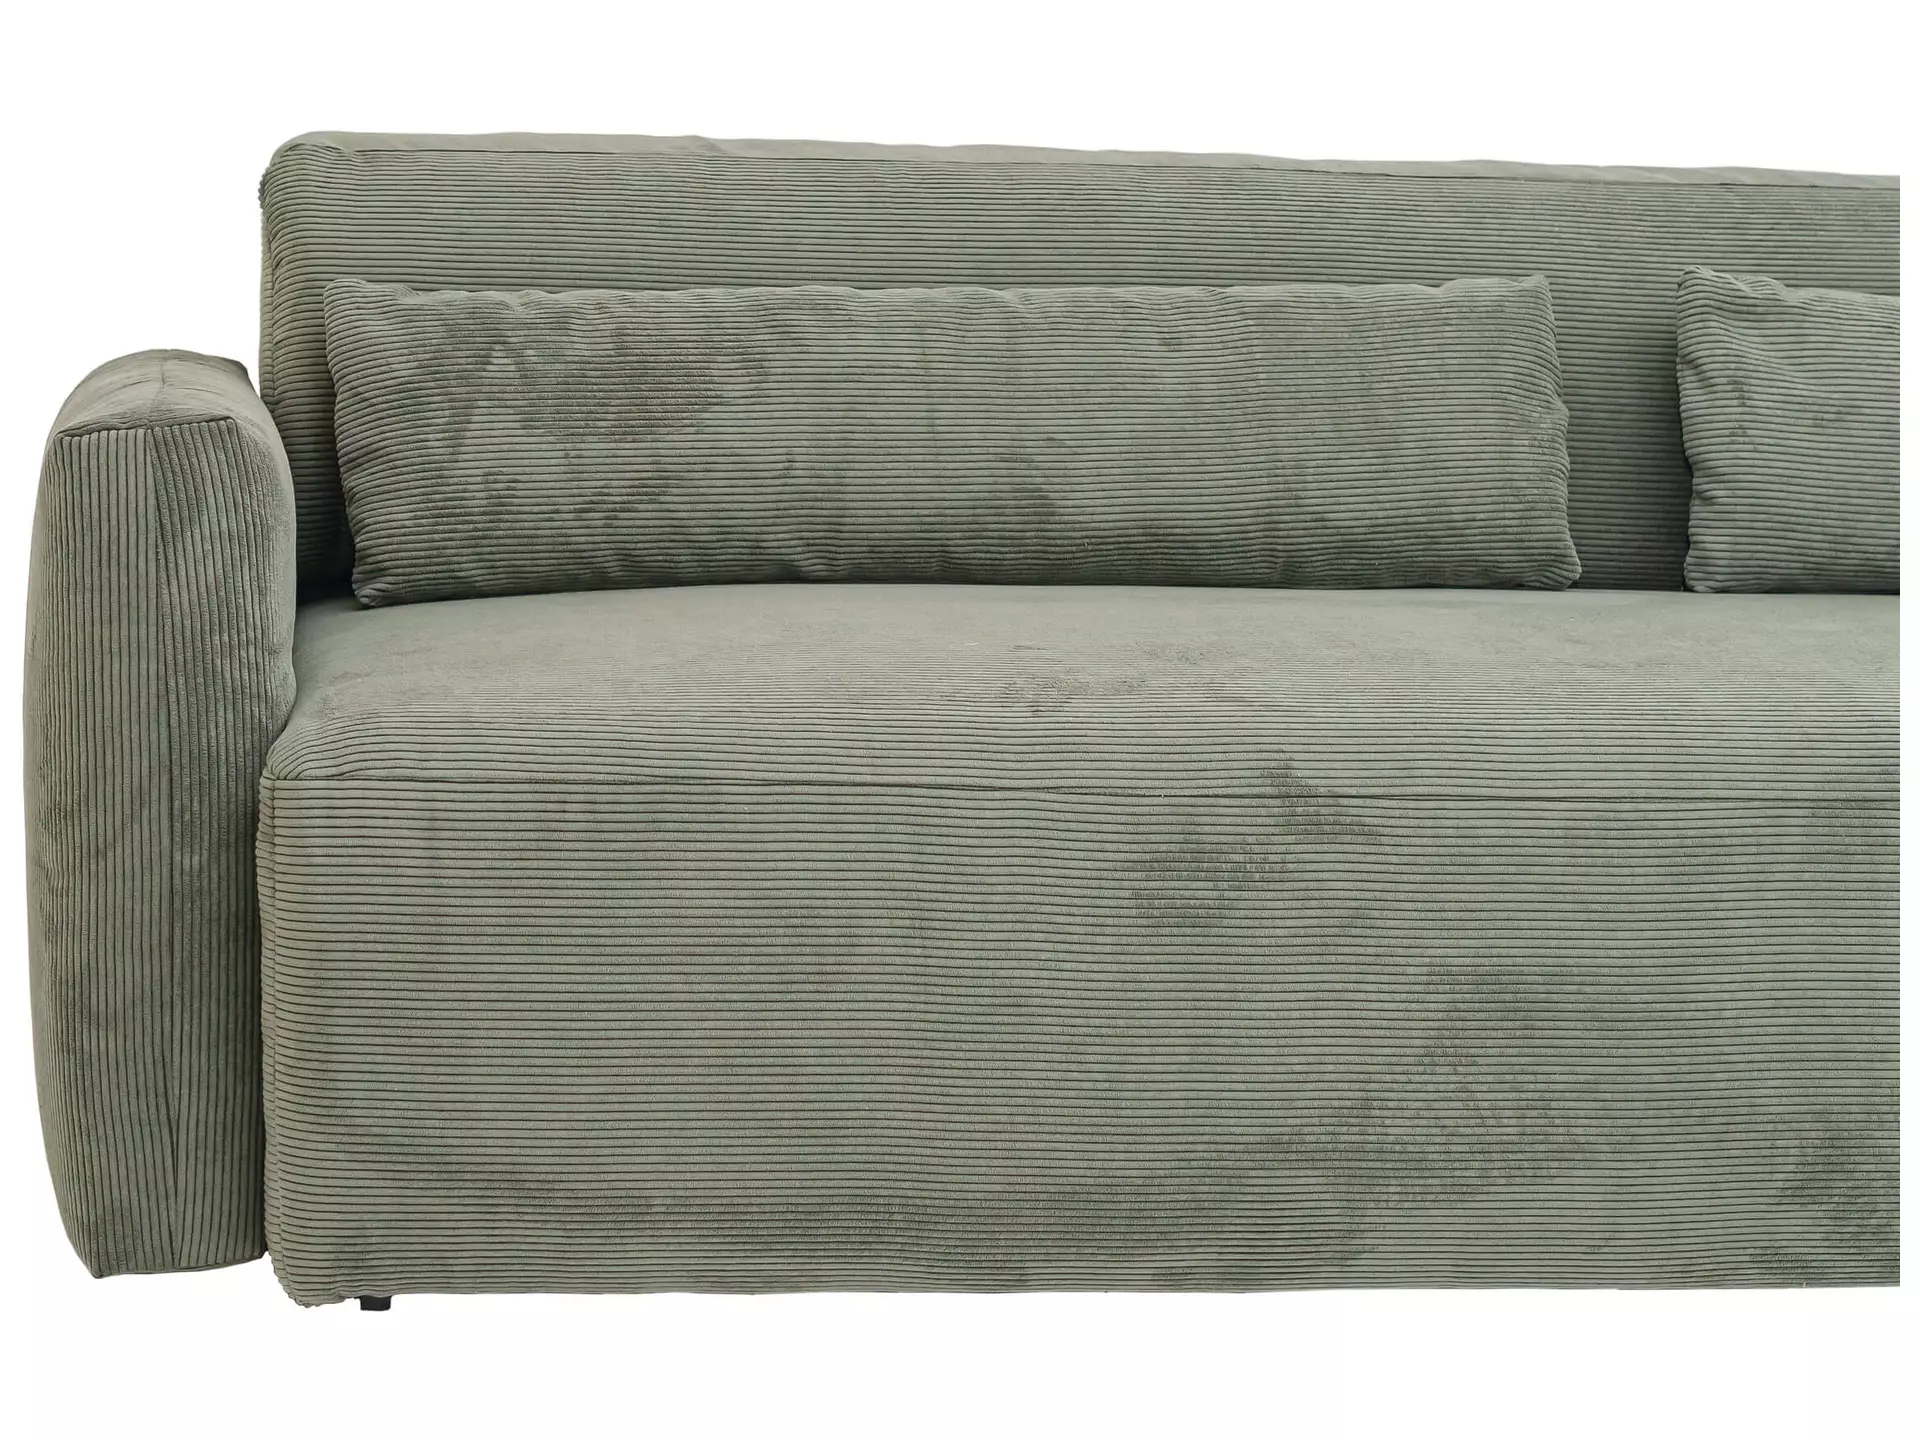 Bettsofa Antonia Candy / Farbe: Oliv / Bezugsmaterial: Stoff